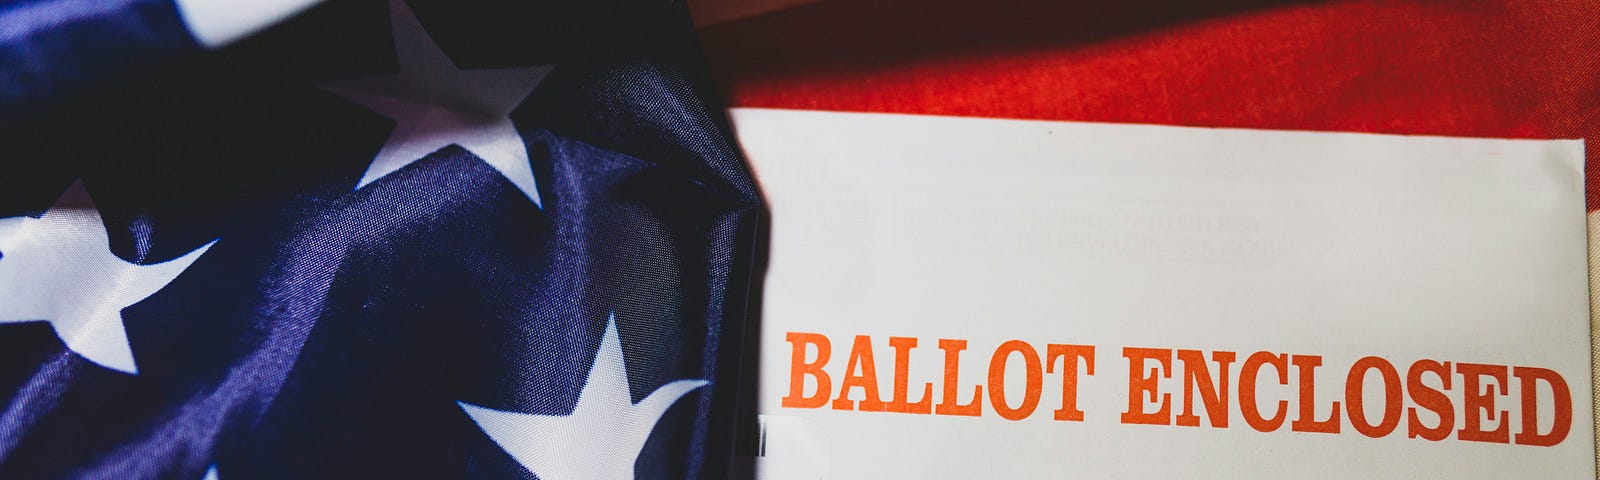 MERICAN FLAG WITH THE WORDS “BALLOT ENCOLSED”